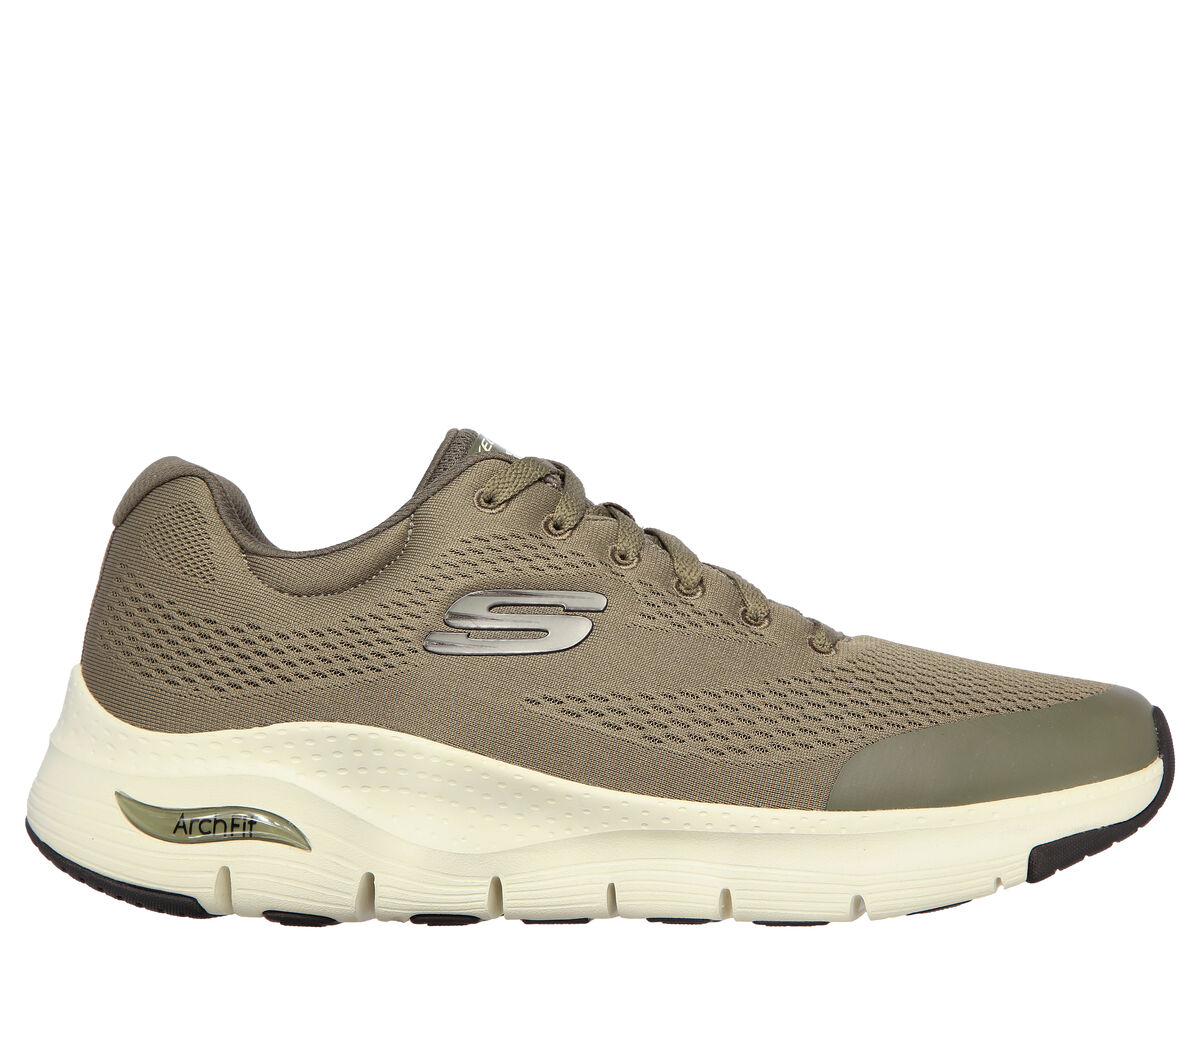 skechers arch fit reviews